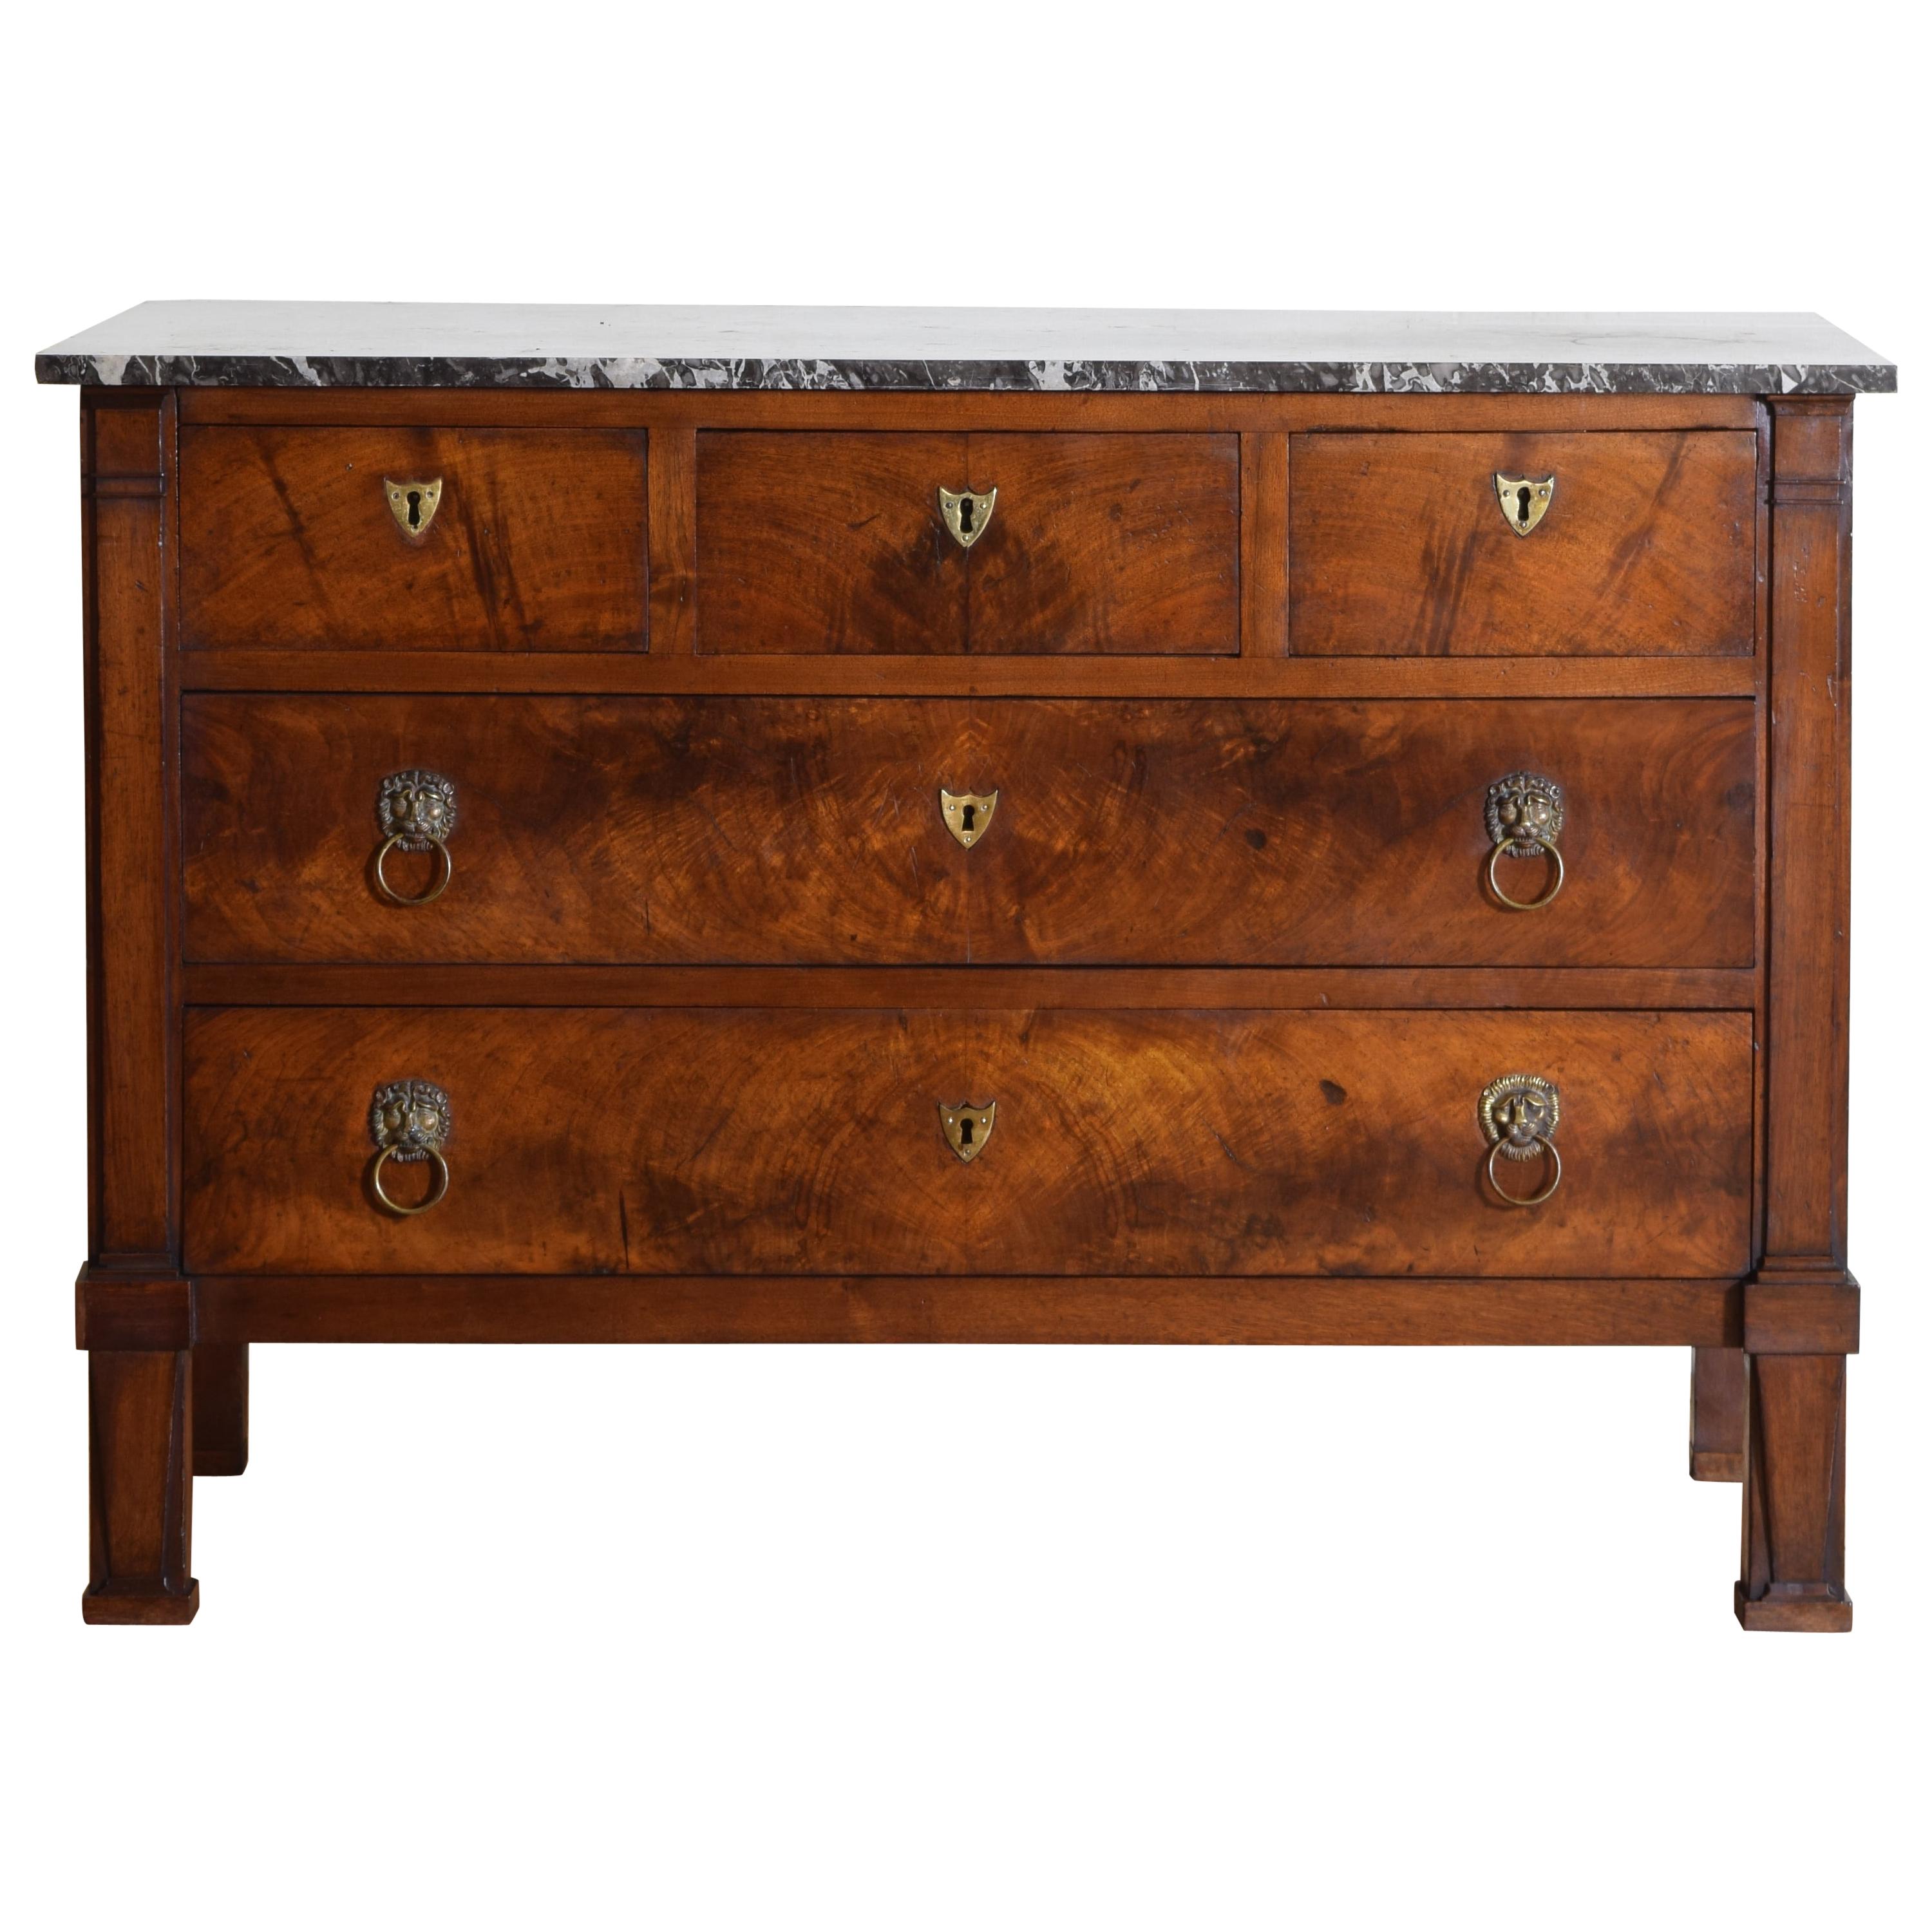 French Neoclassic Walnut and Marble Top 5-Drawer Commode, 2ndq 19th Century